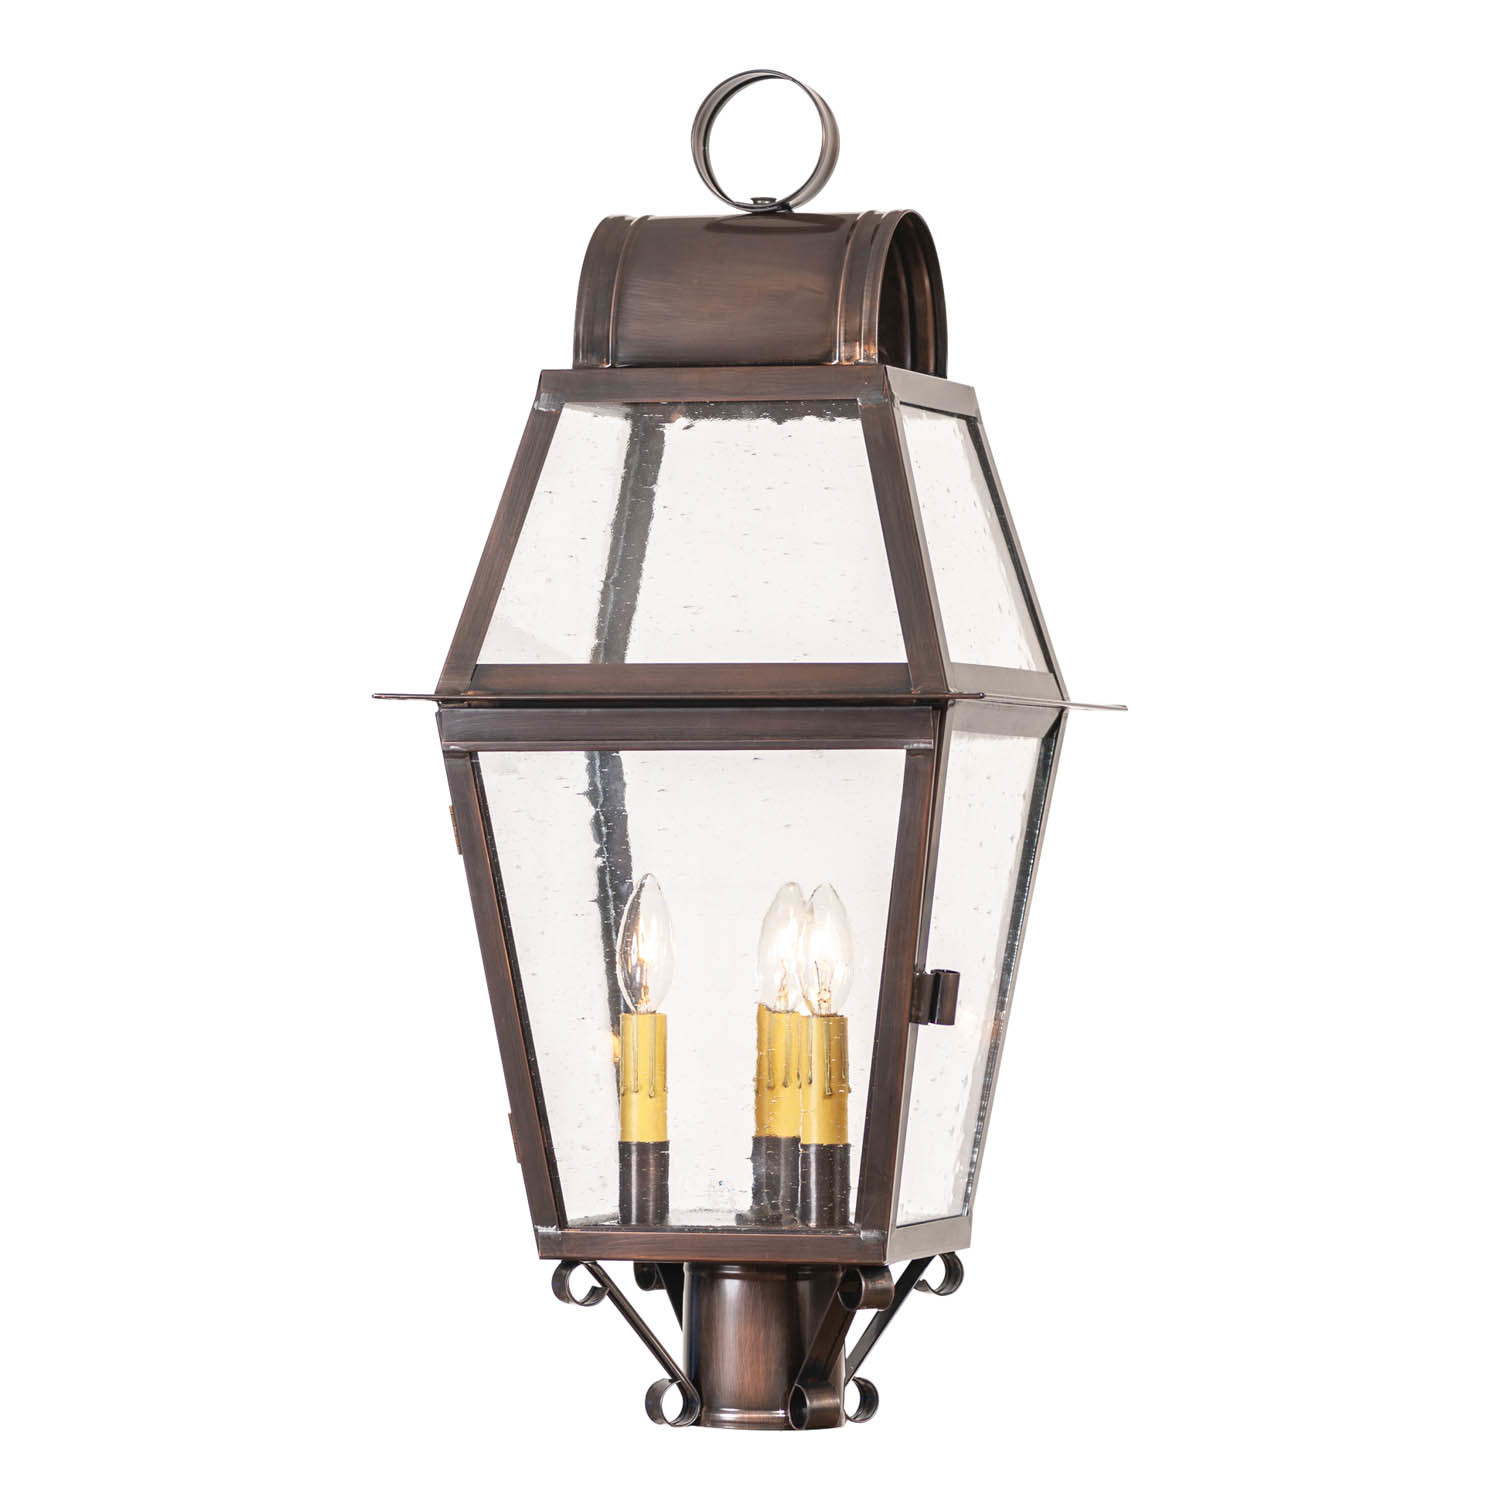 Irvins Country Tinware Independence Outdoor Post Light in Solid Antique Copper - $574.15